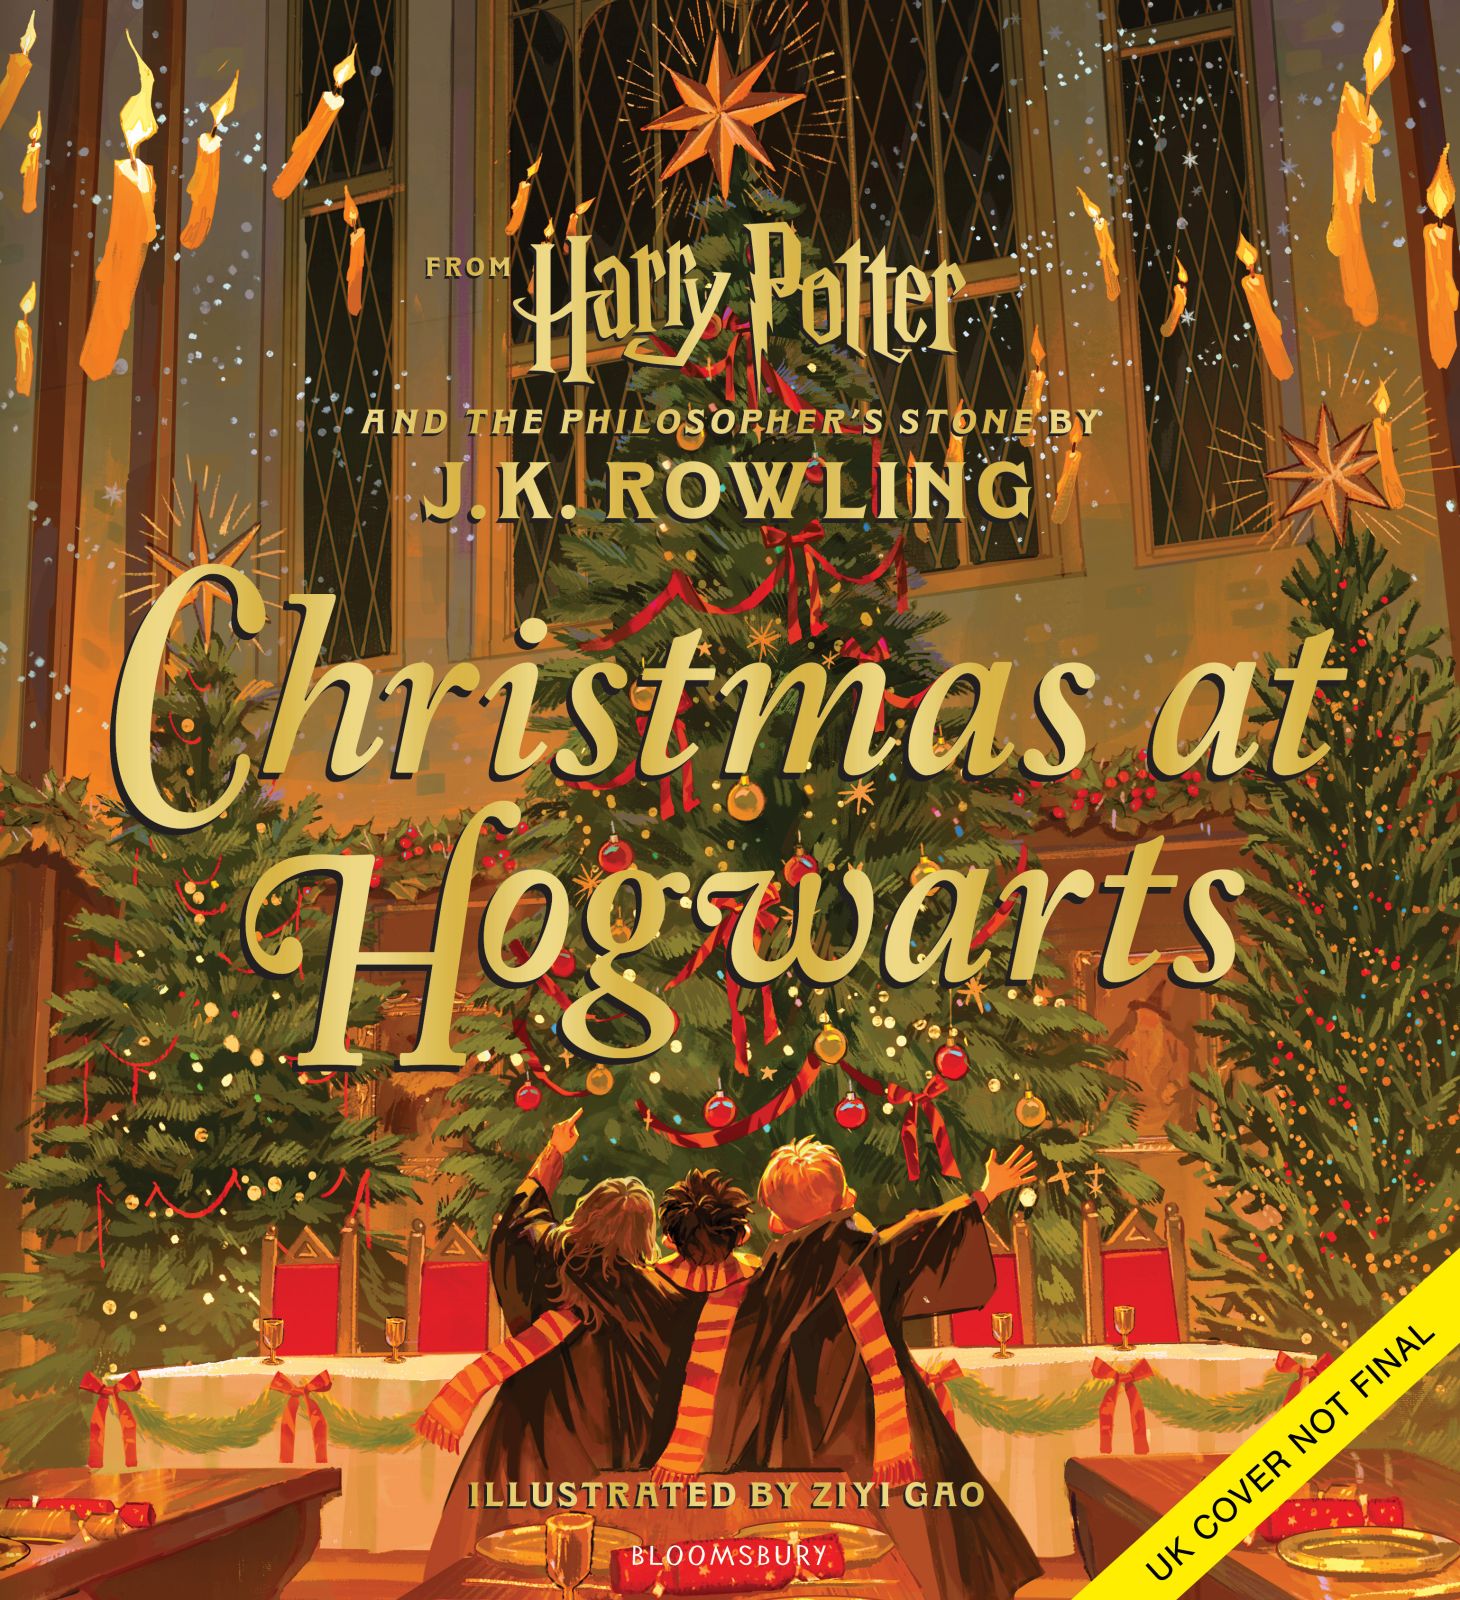 Bloomsbury Unveils New Harry Potter Holiday Book: “Christmas at Hogwarts”